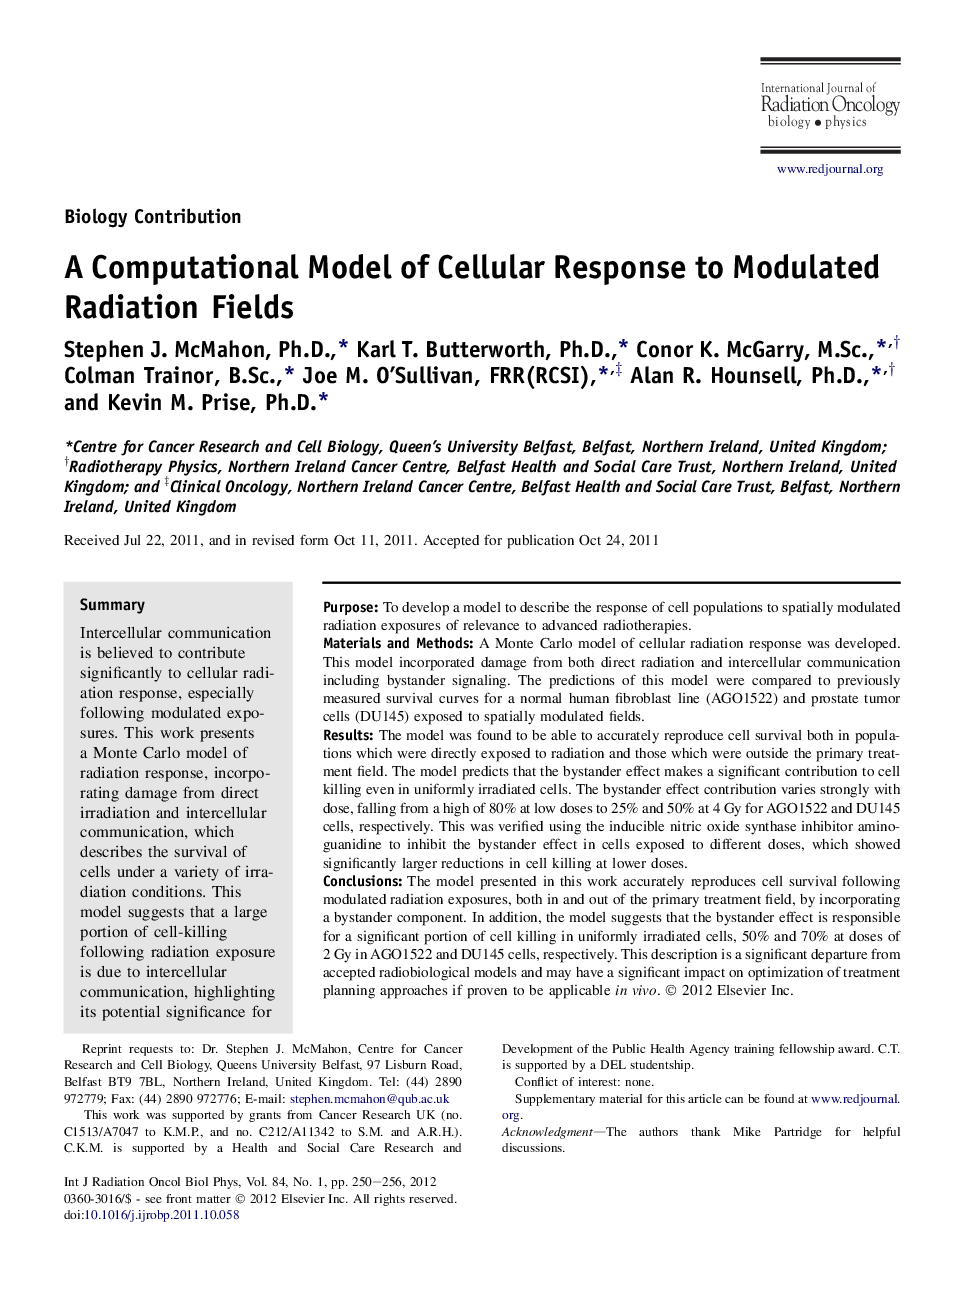 A Computational Model of Cellular Response to Modulated Radiation Fields